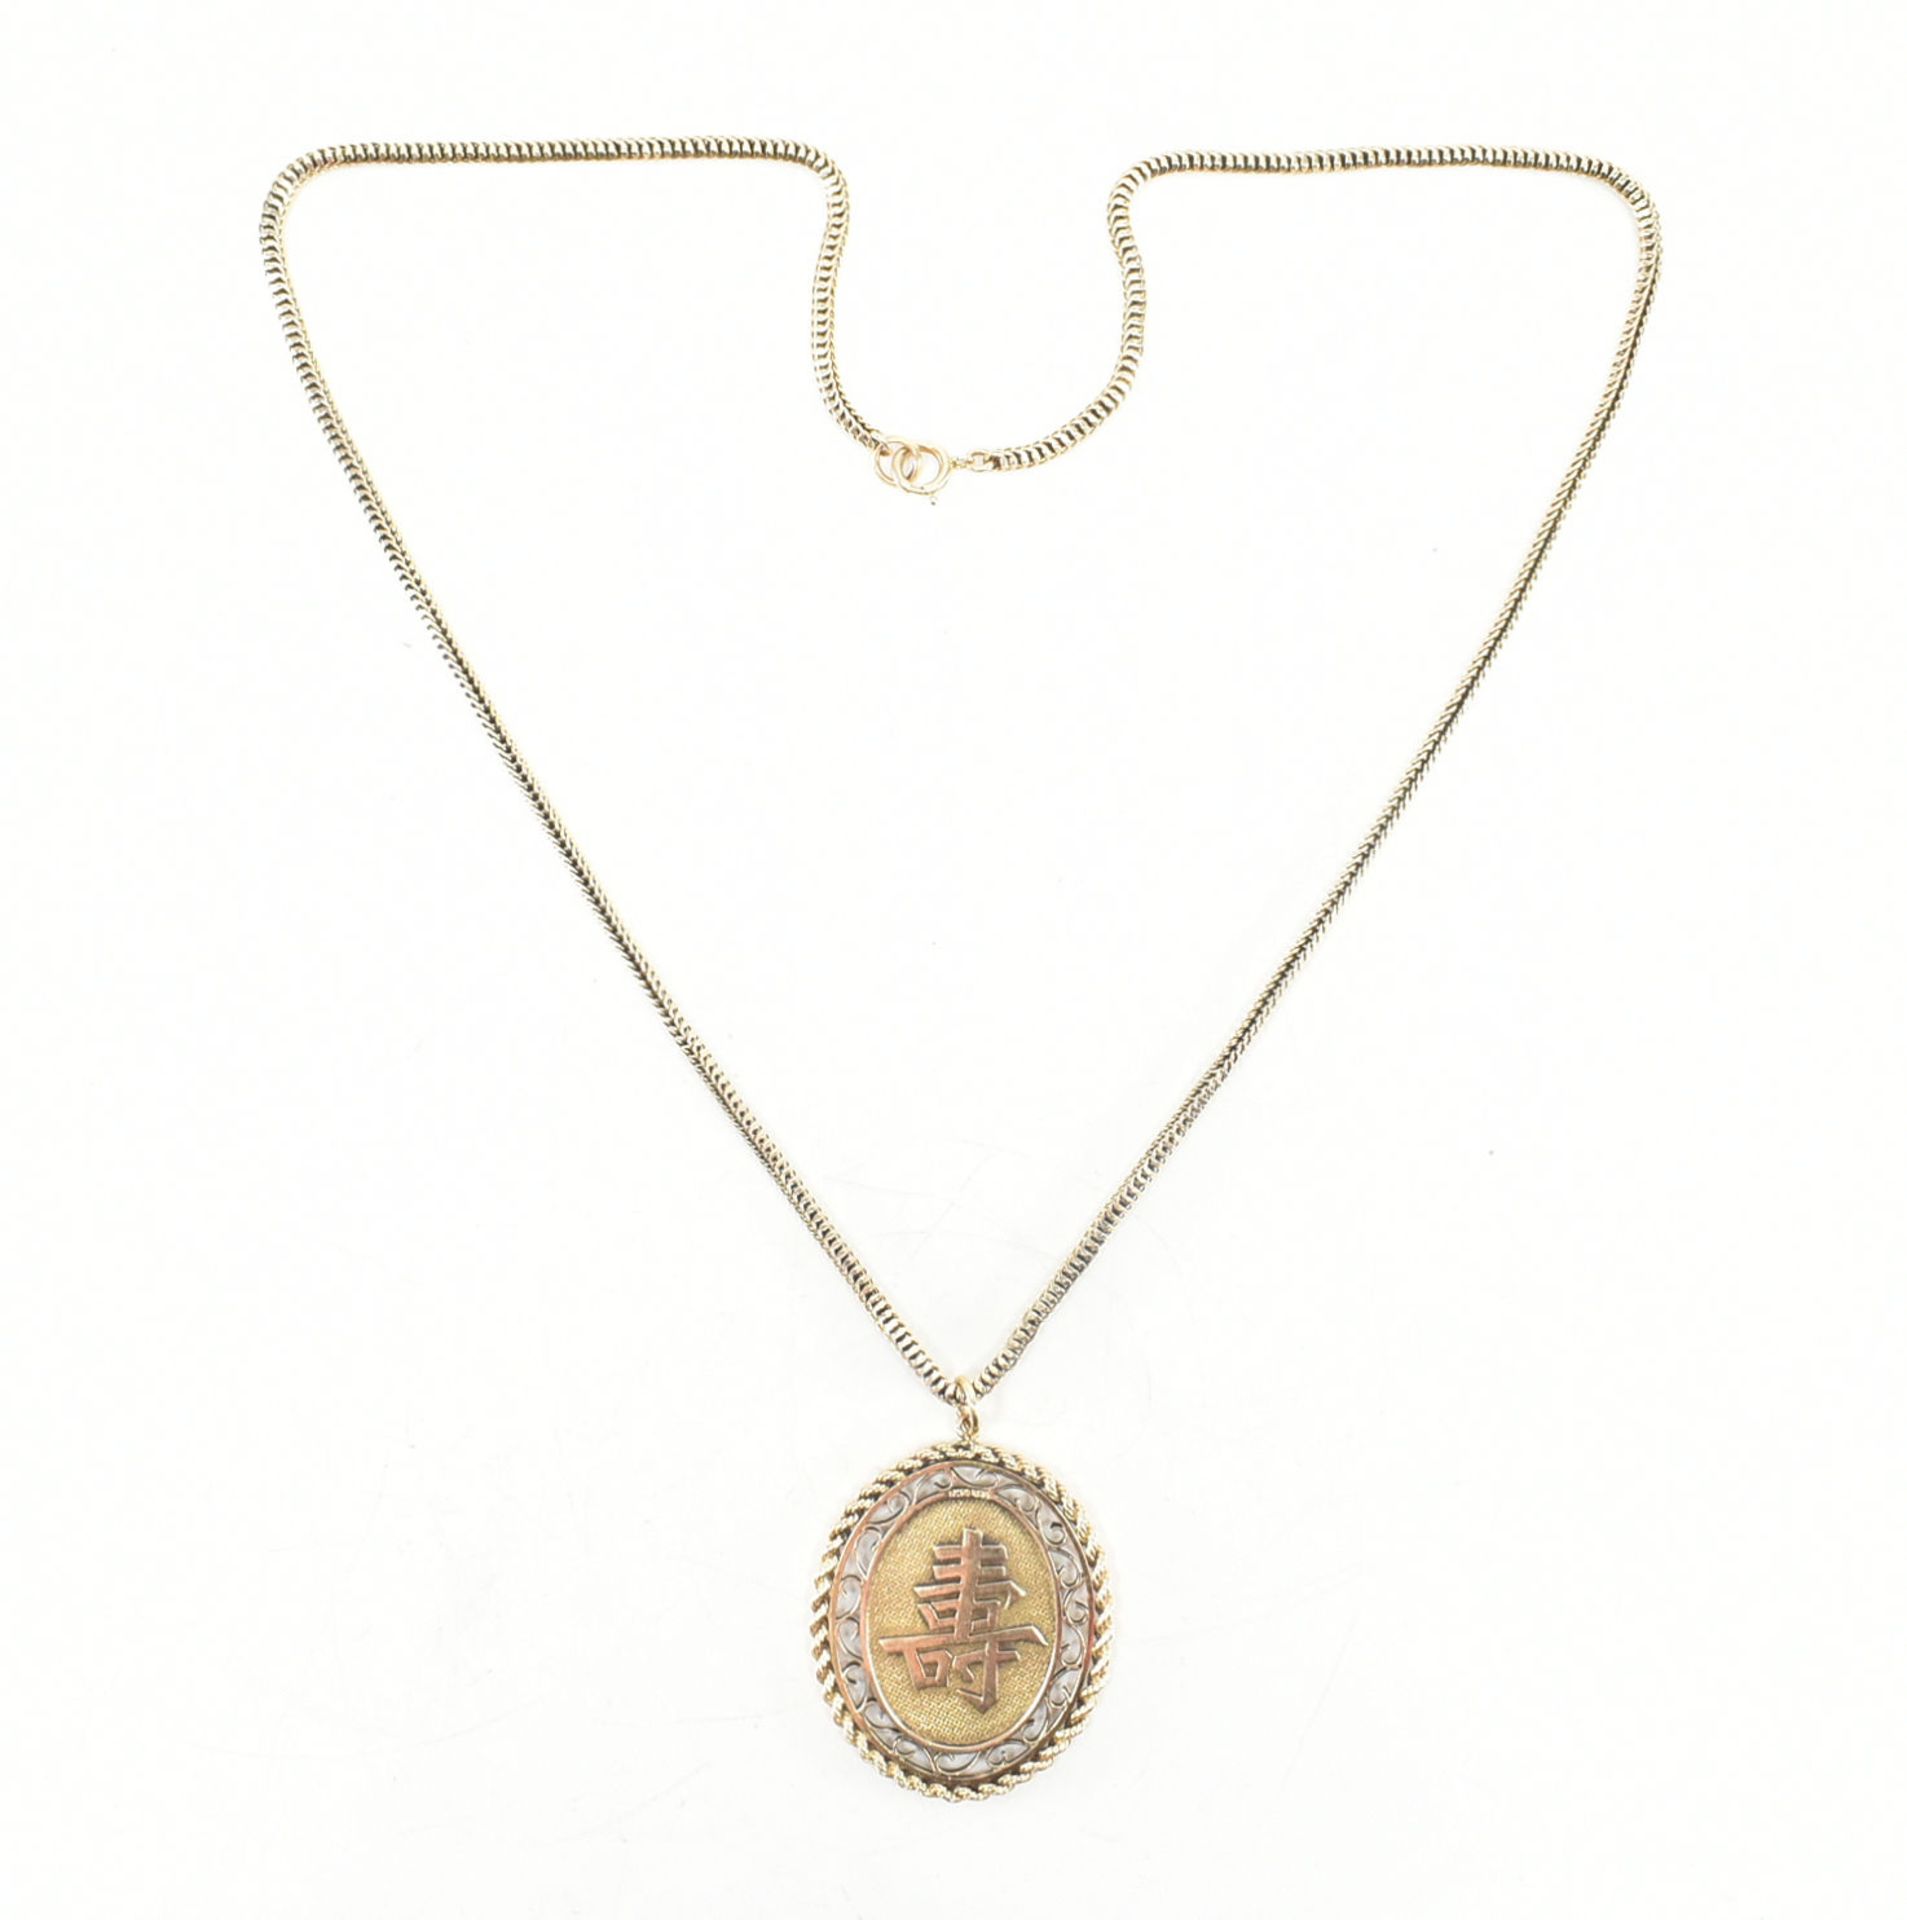 CHINESE GOLD PENDANT NECKLACE